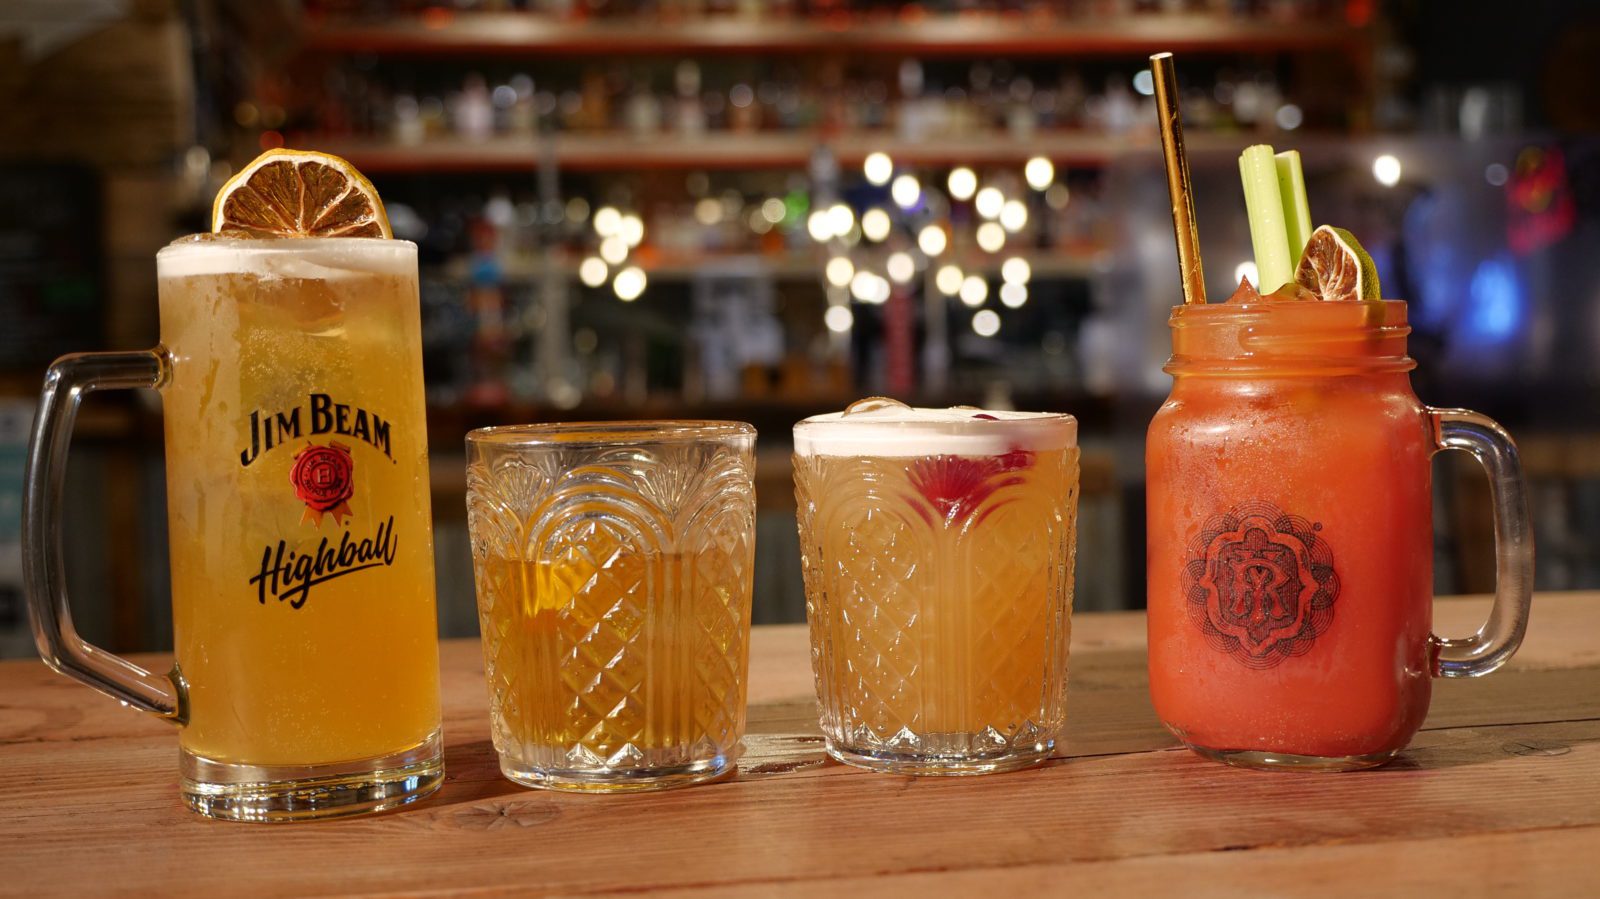 Over in the East End, Van WInkle offers cocktails and BBQ in an wild west-esque pub